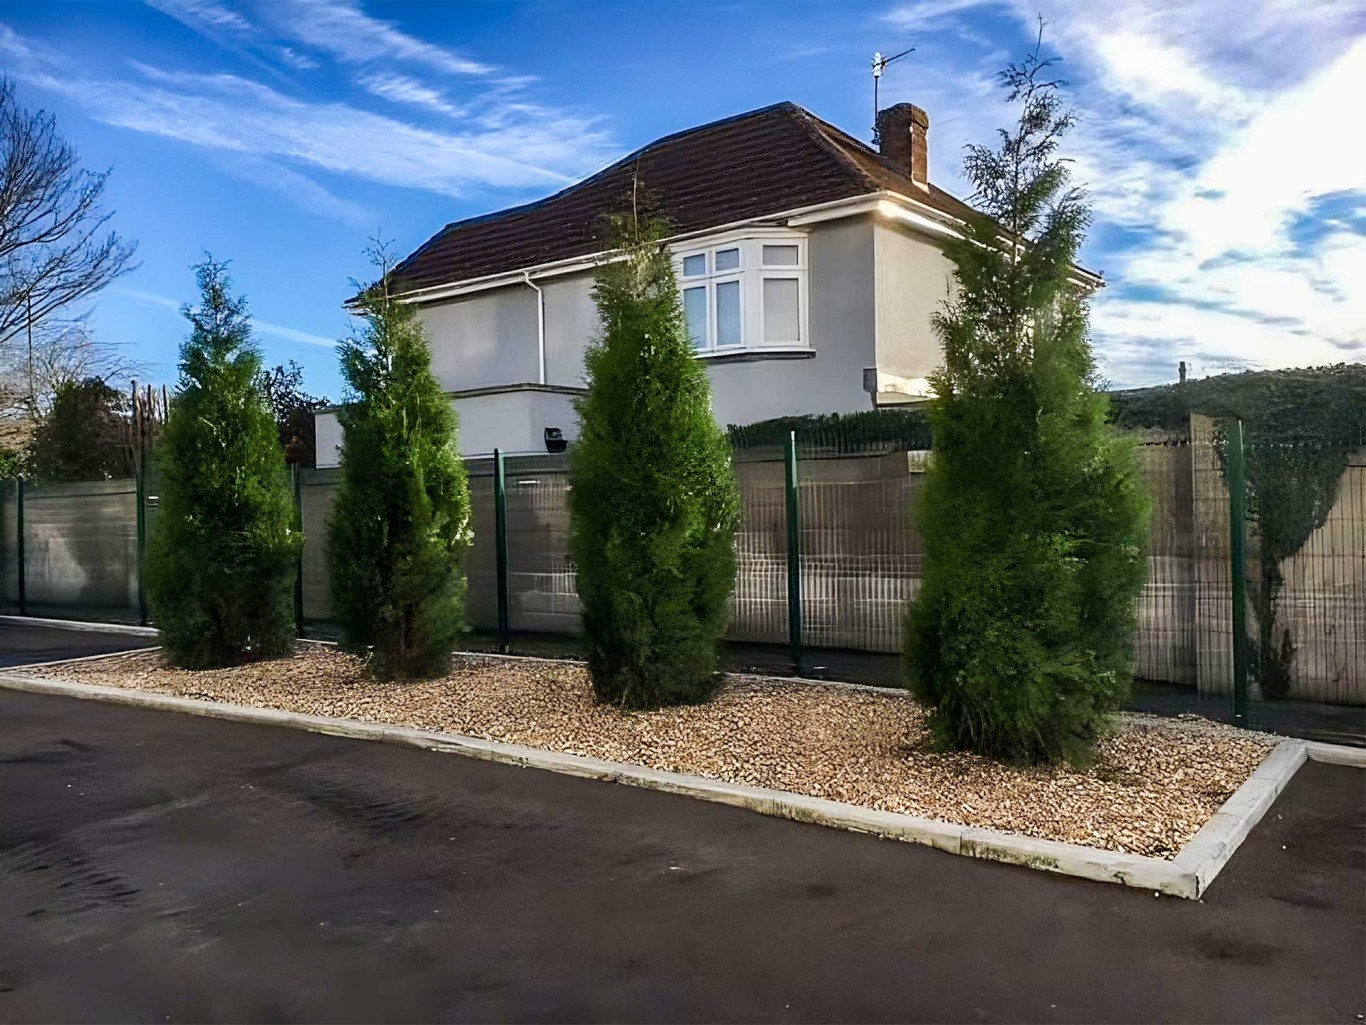 Row of four recently planted trees with house in background and blue sky.